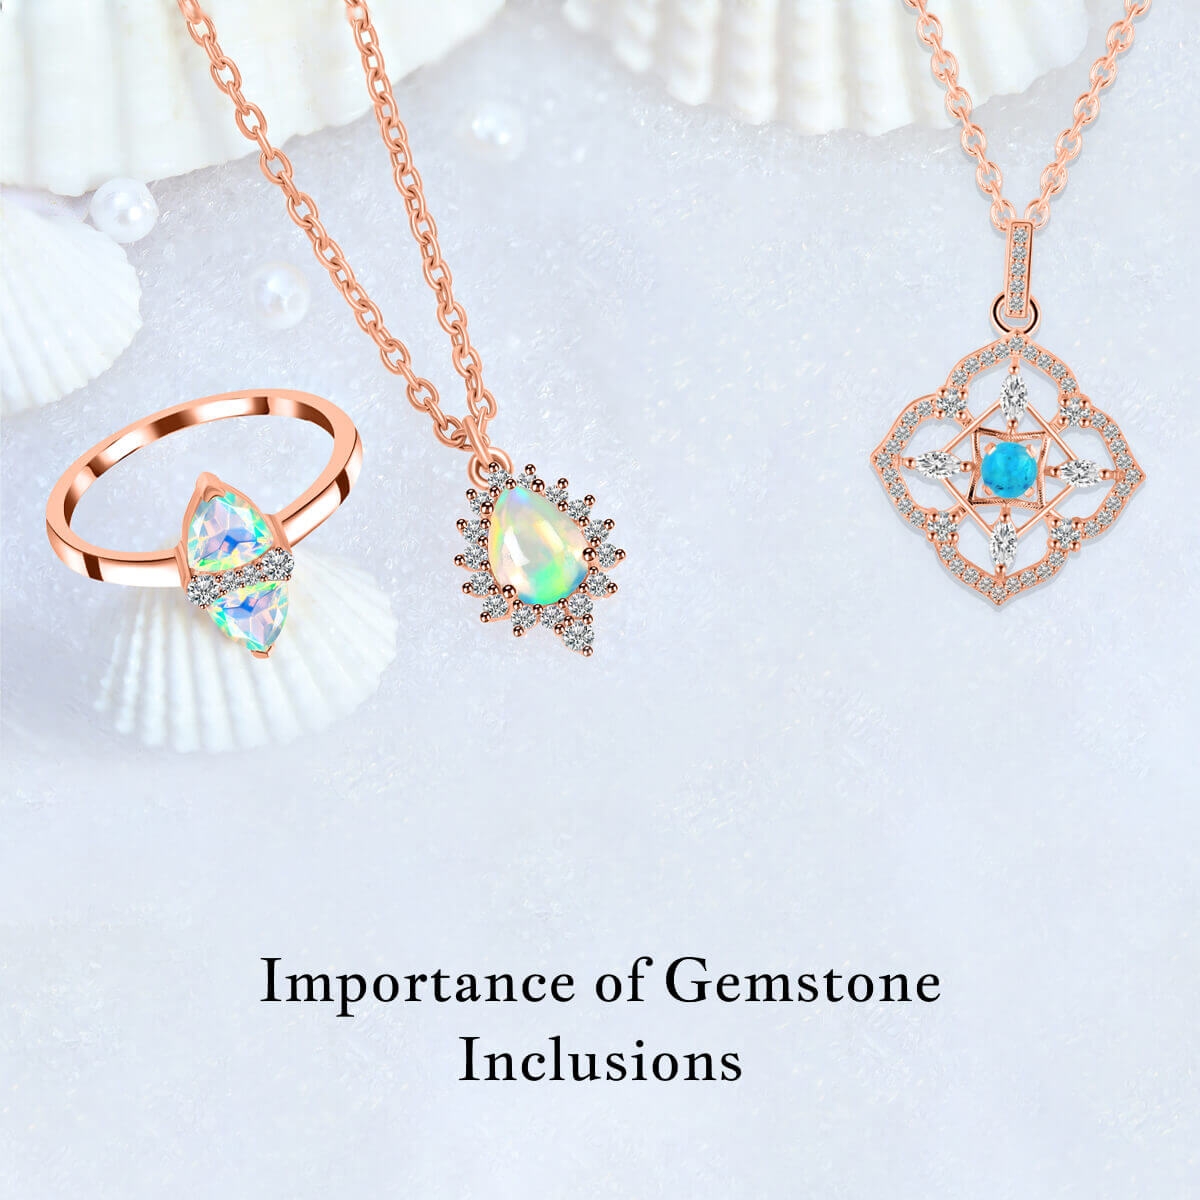 Gemstone Inclusions Important